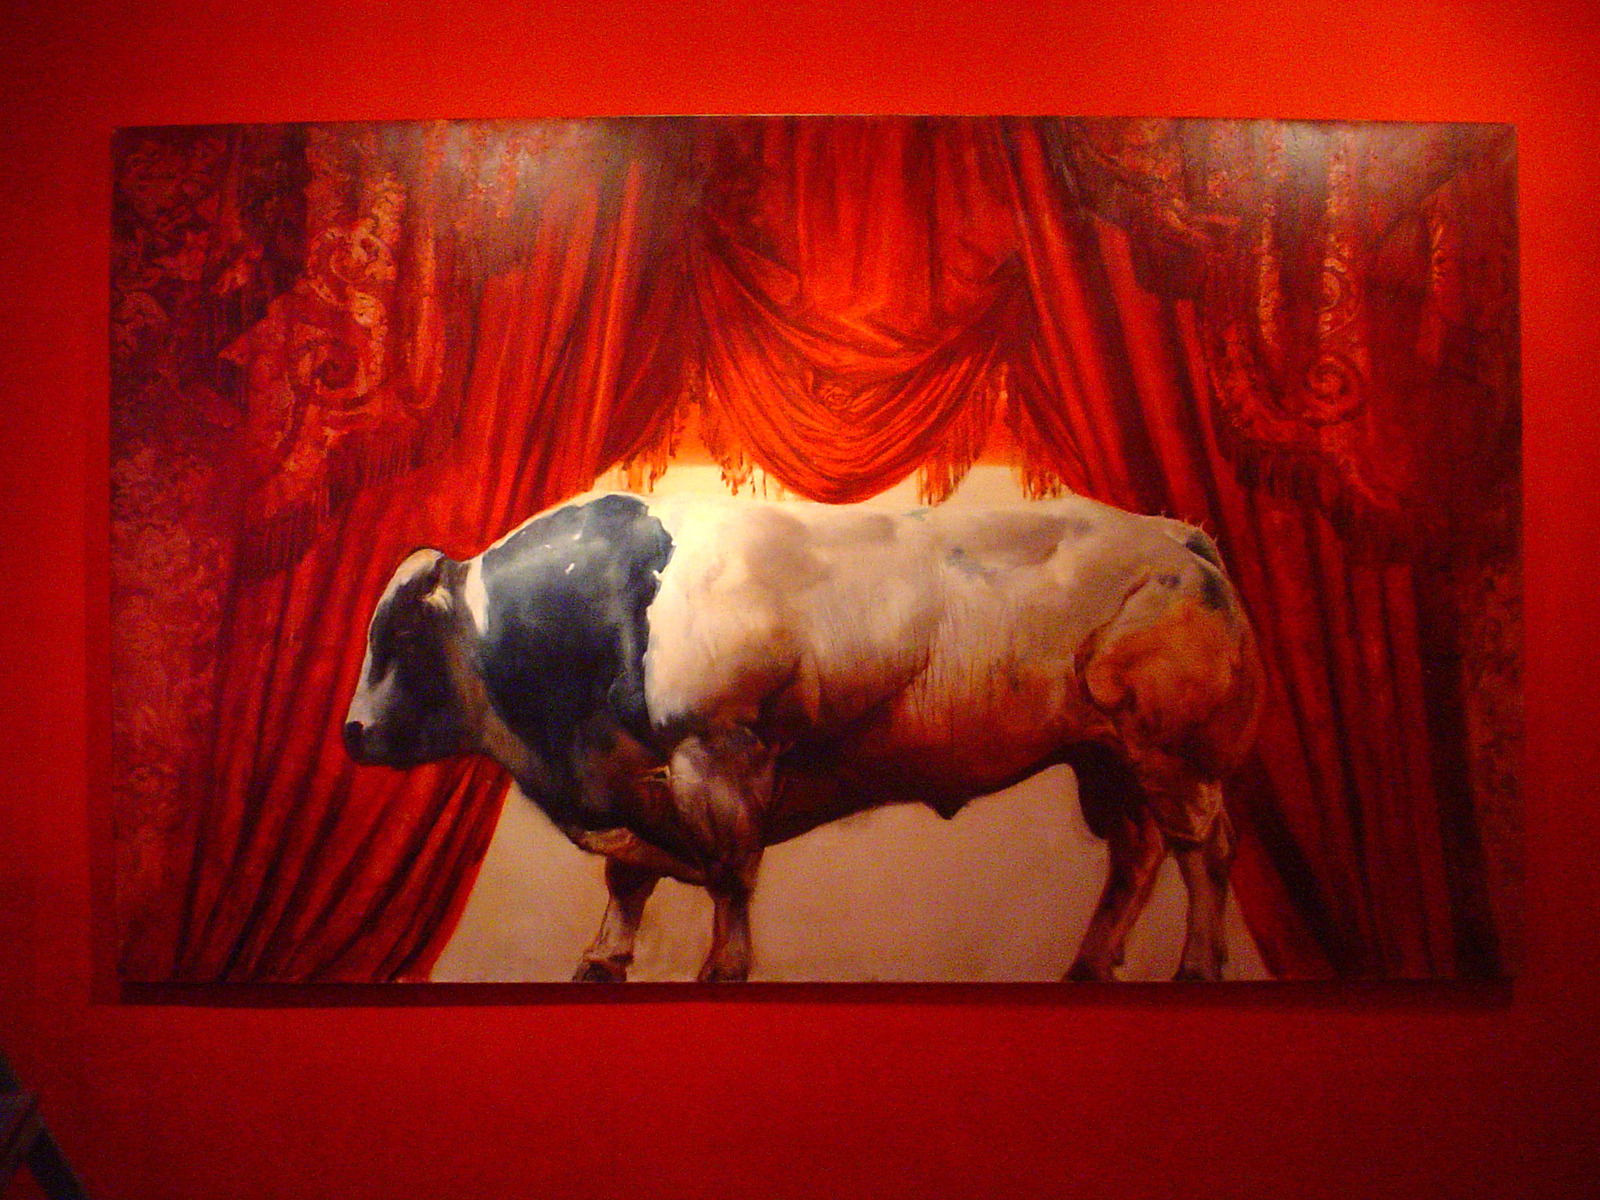 Taur cu cortina rosie - 2003, oil on canvas, 180 x 280, private collection, RO - 5